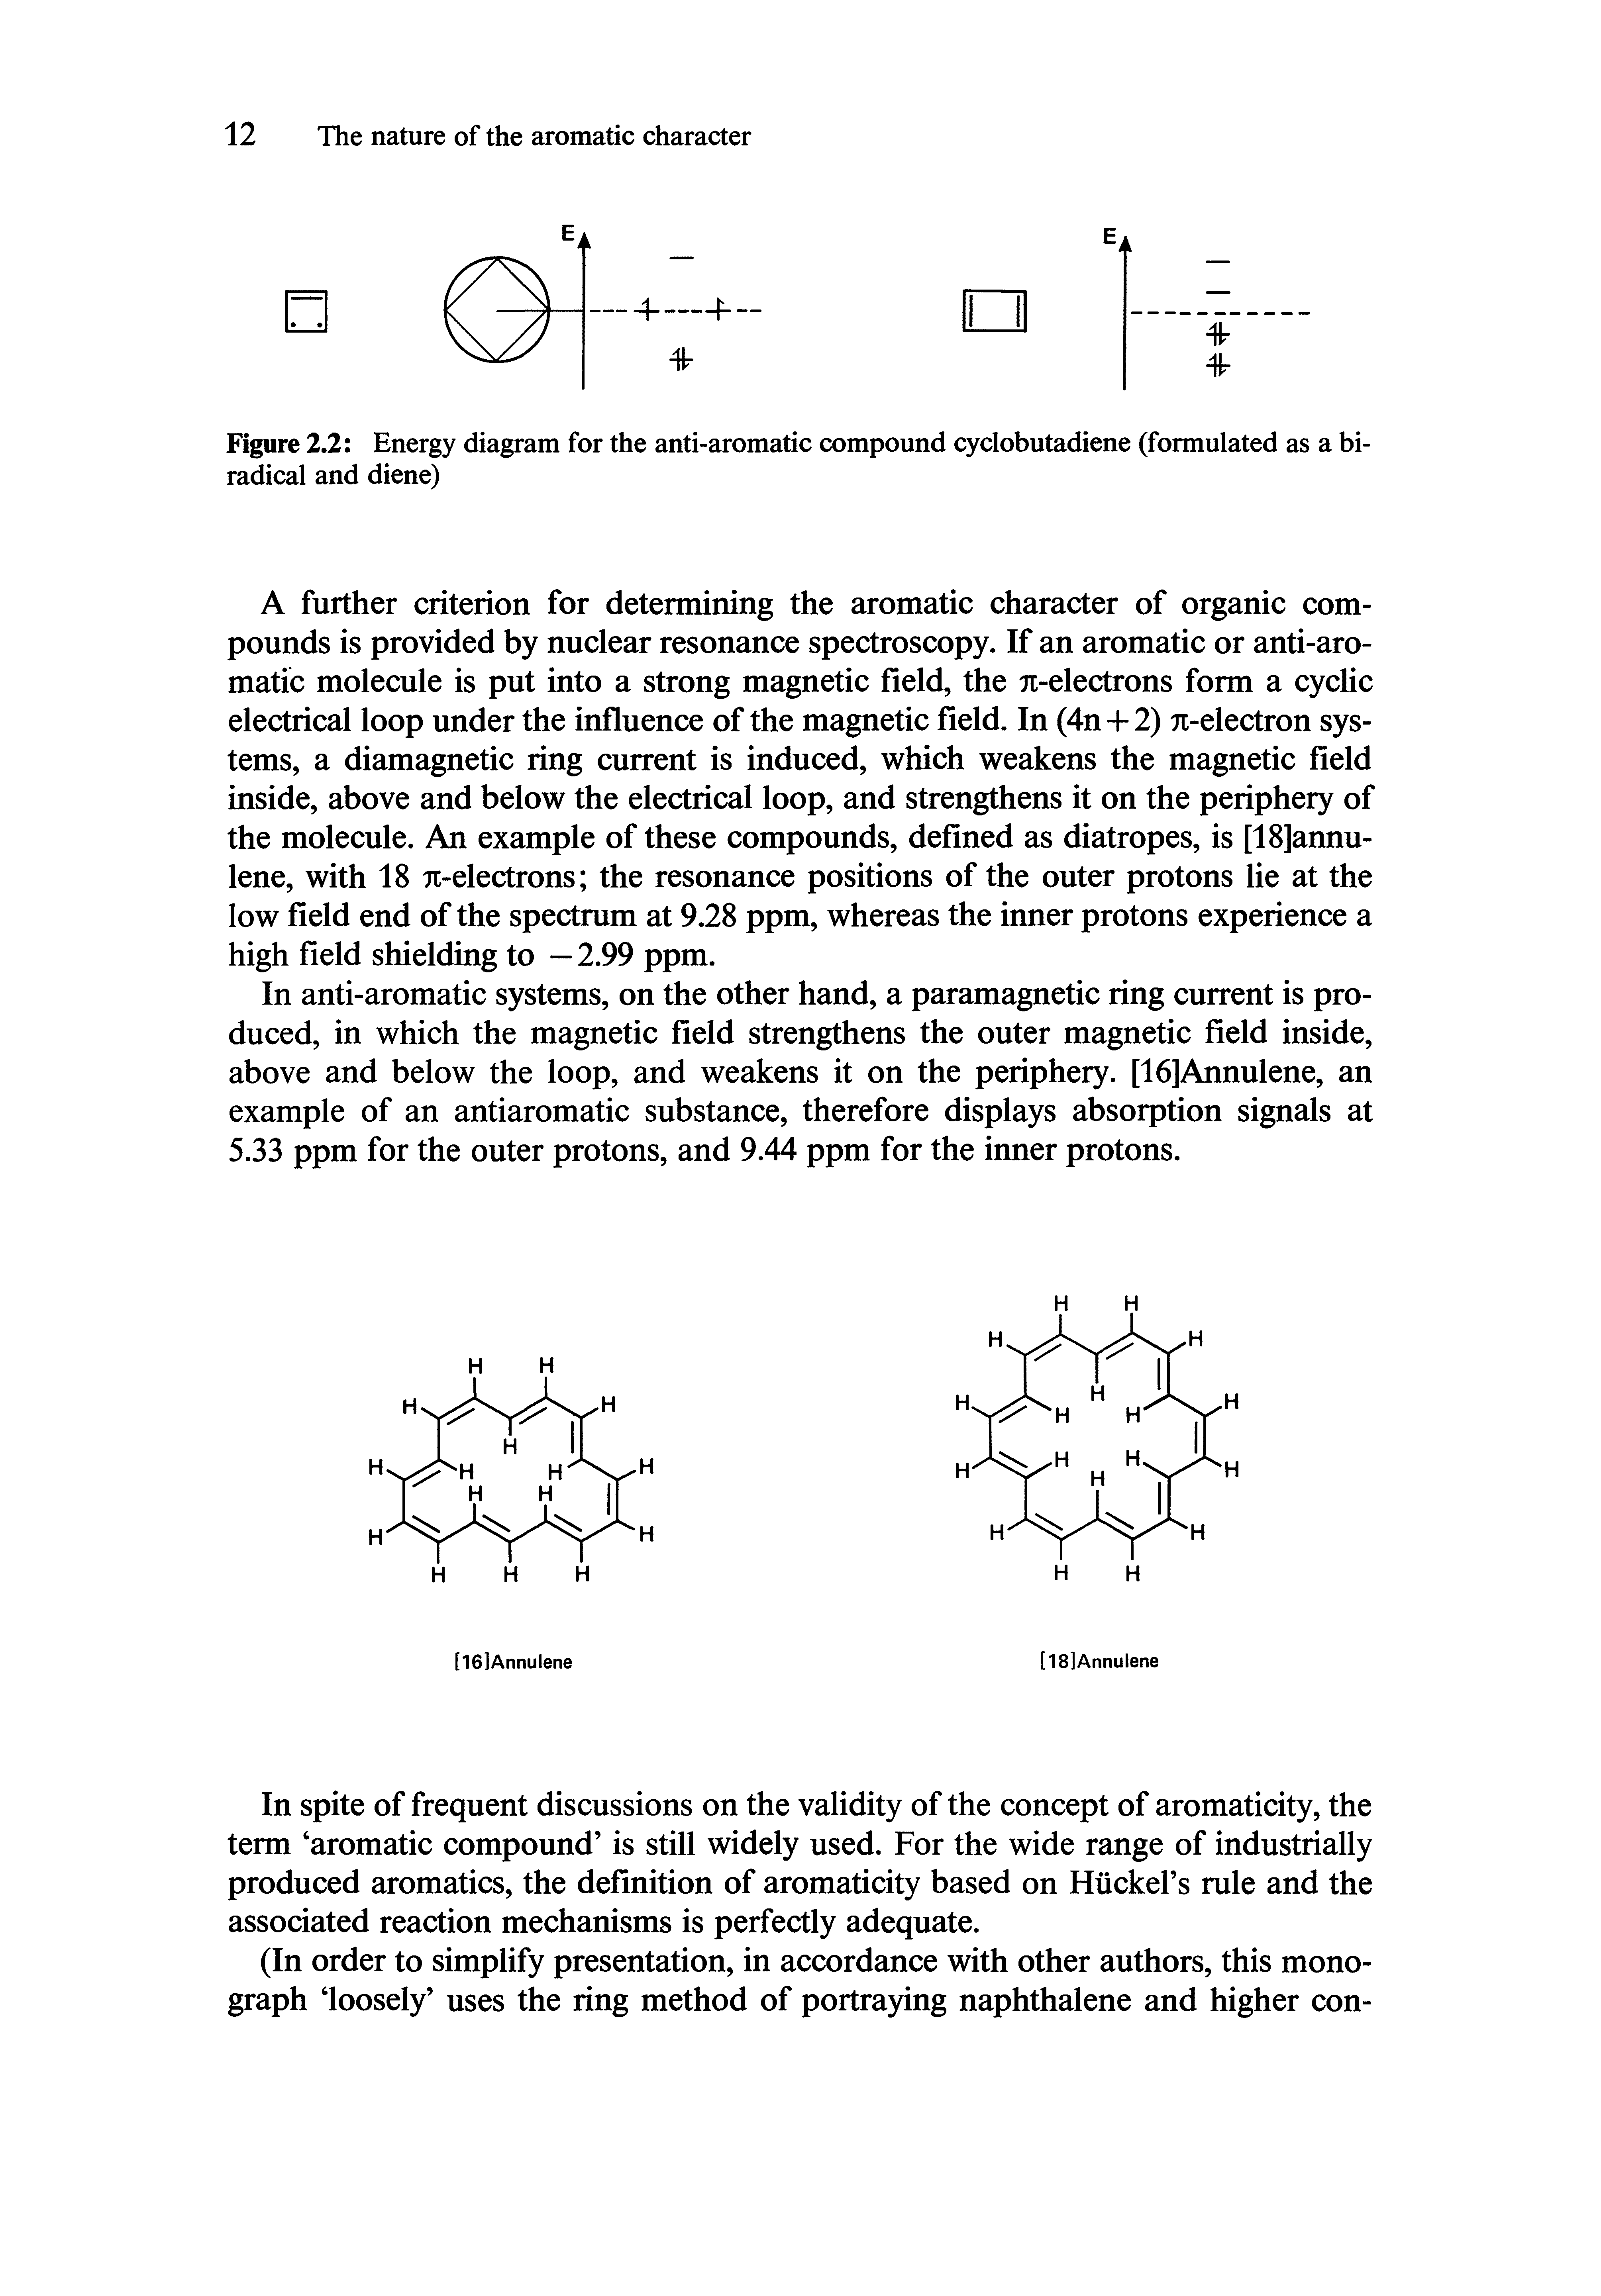 Figure 2.2 Energy diagram for the anti-aromatic compound cyclobutadiene (formulated as a biradical and diene)...